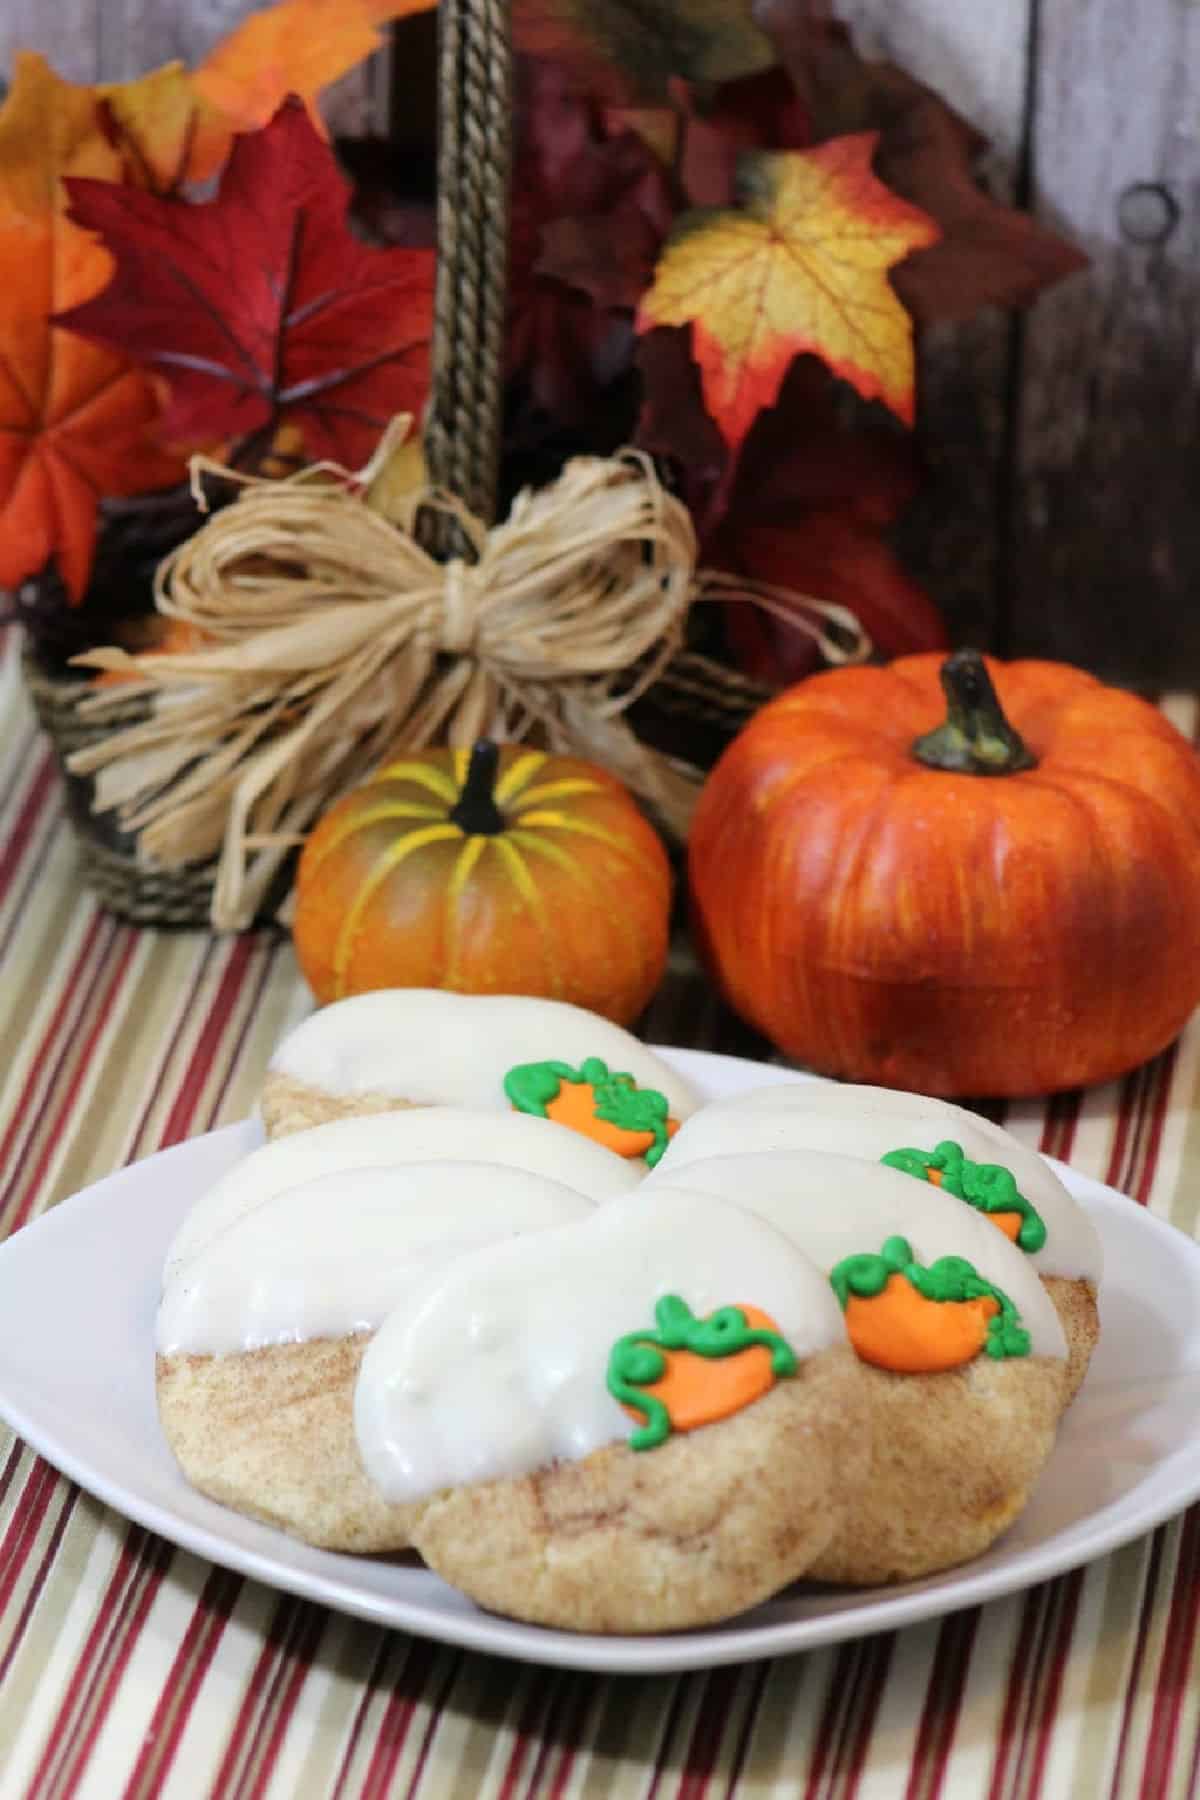 Pumpkin snickerdoodle cookies with pumpkins in background on a striped tablecloth.